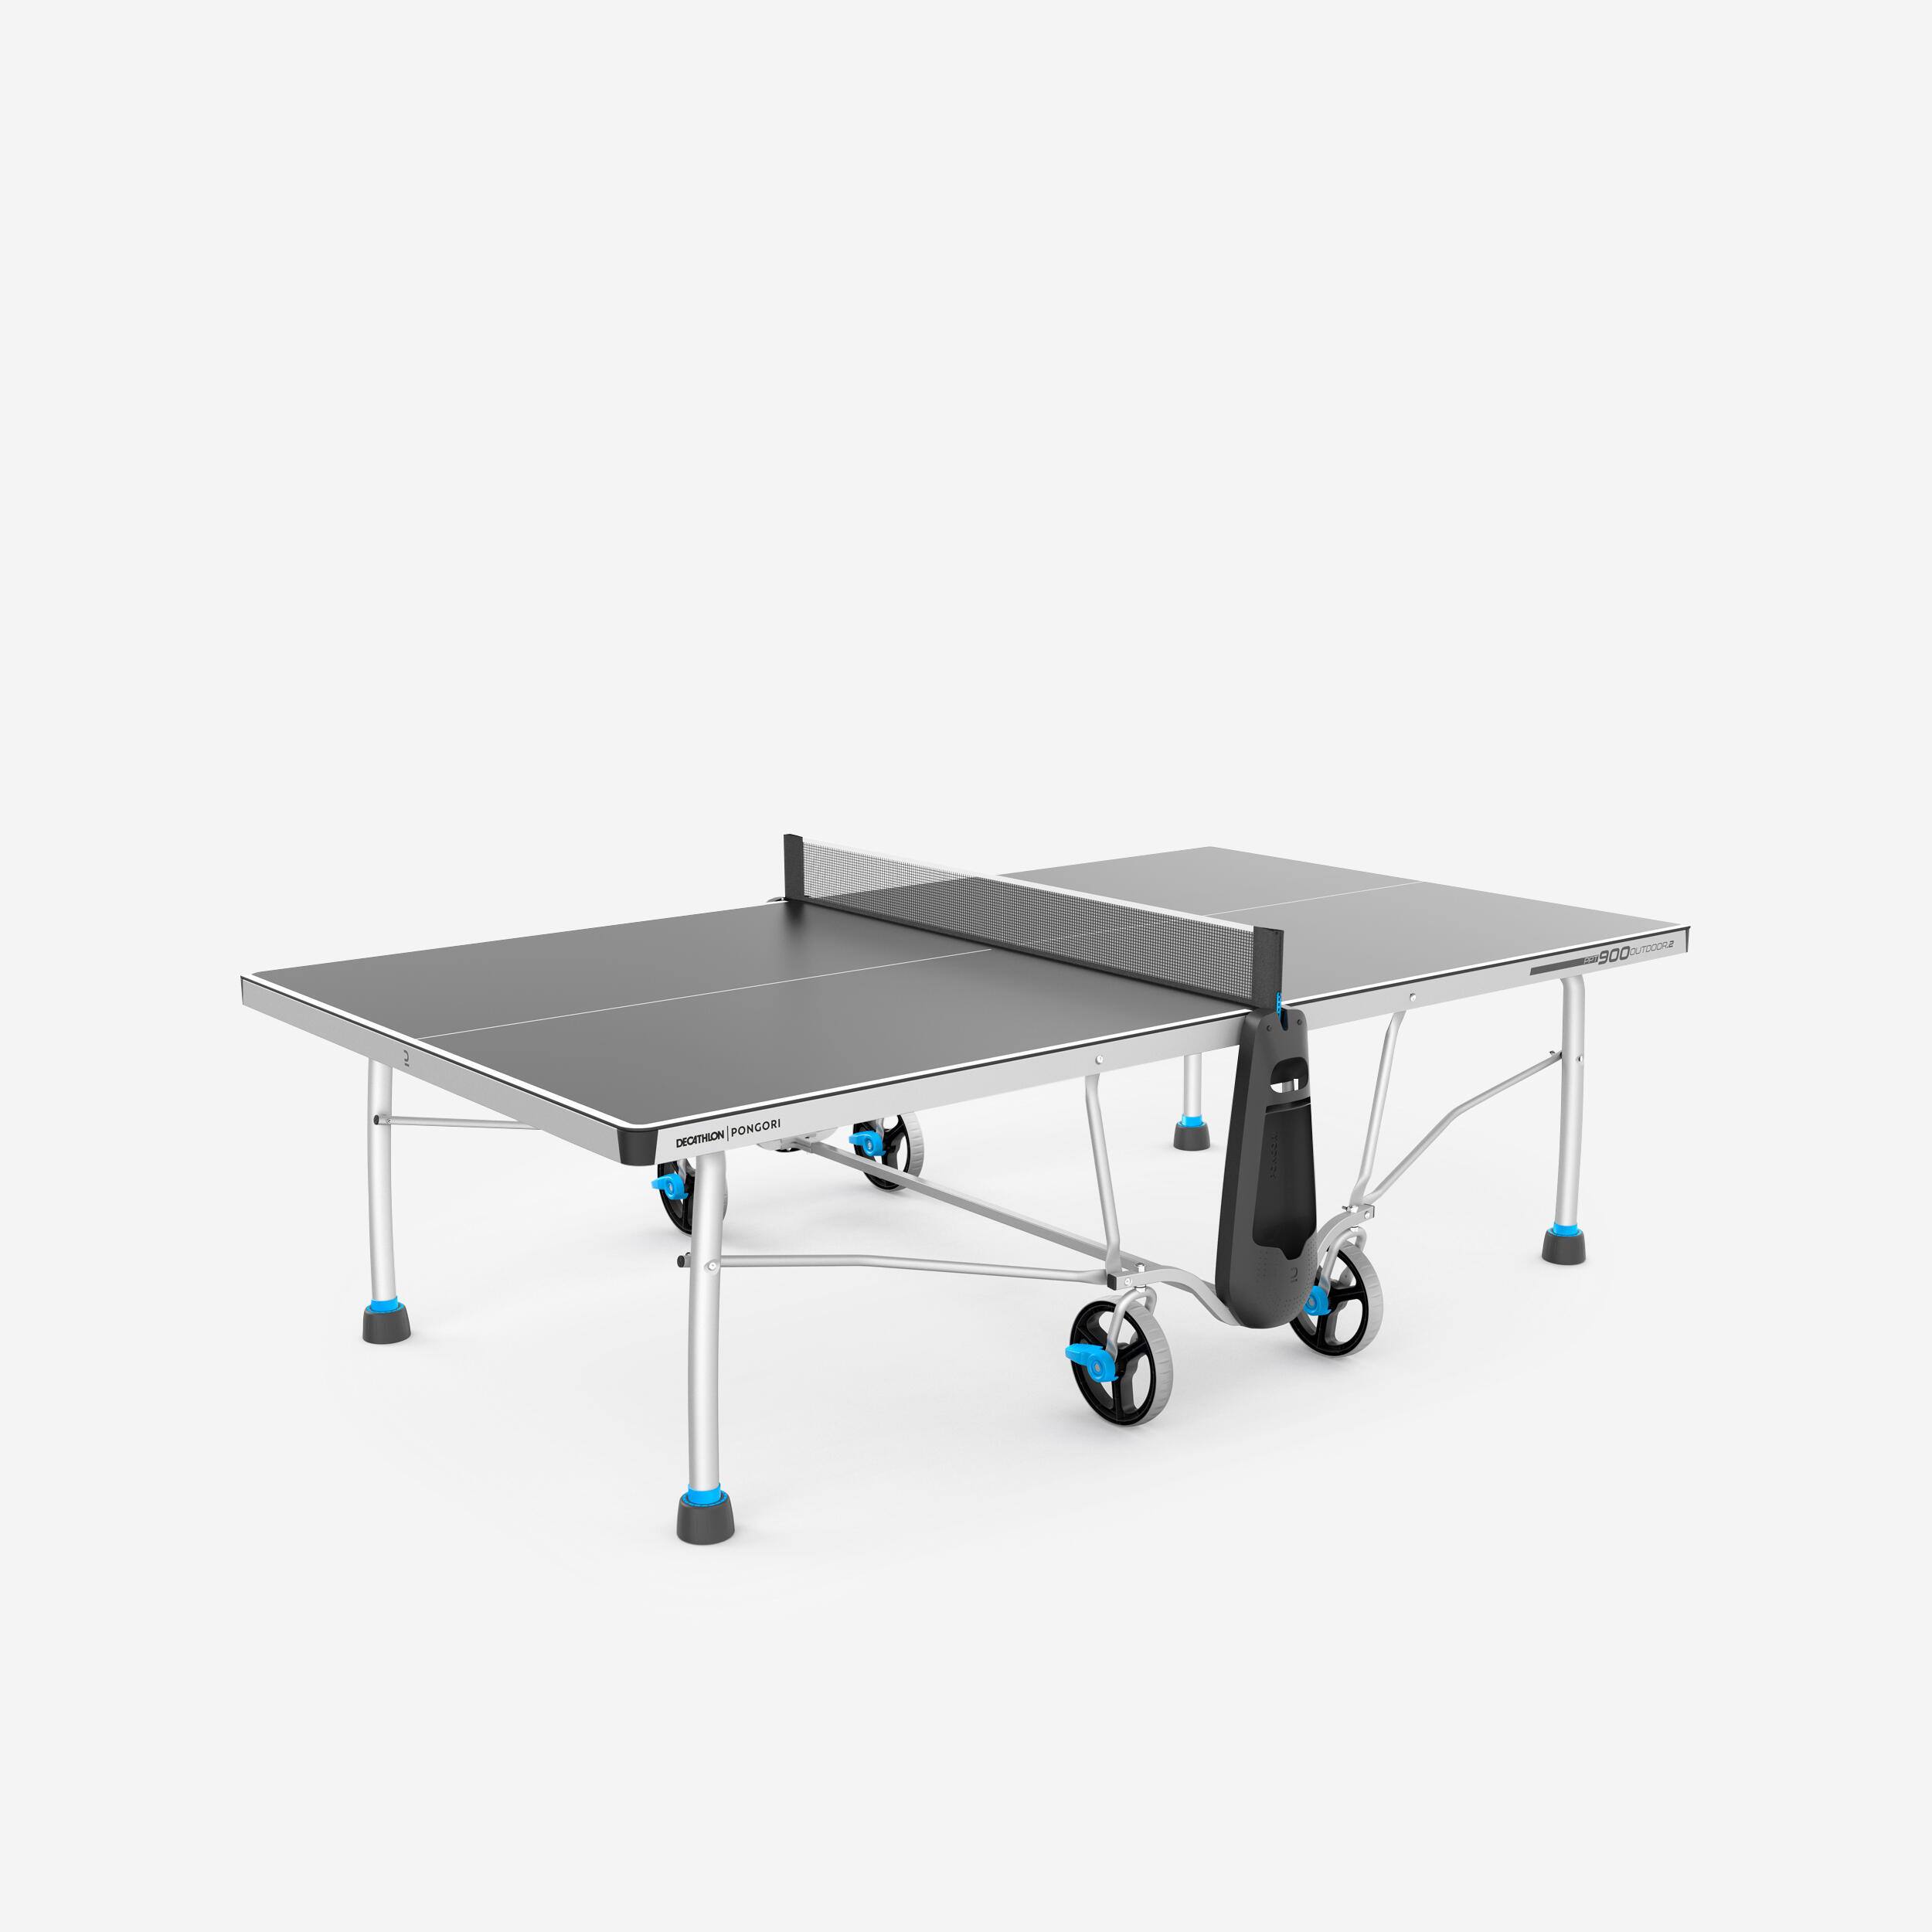 Image of Table Tennis Table Outdoor - PPT 900.2 Grey